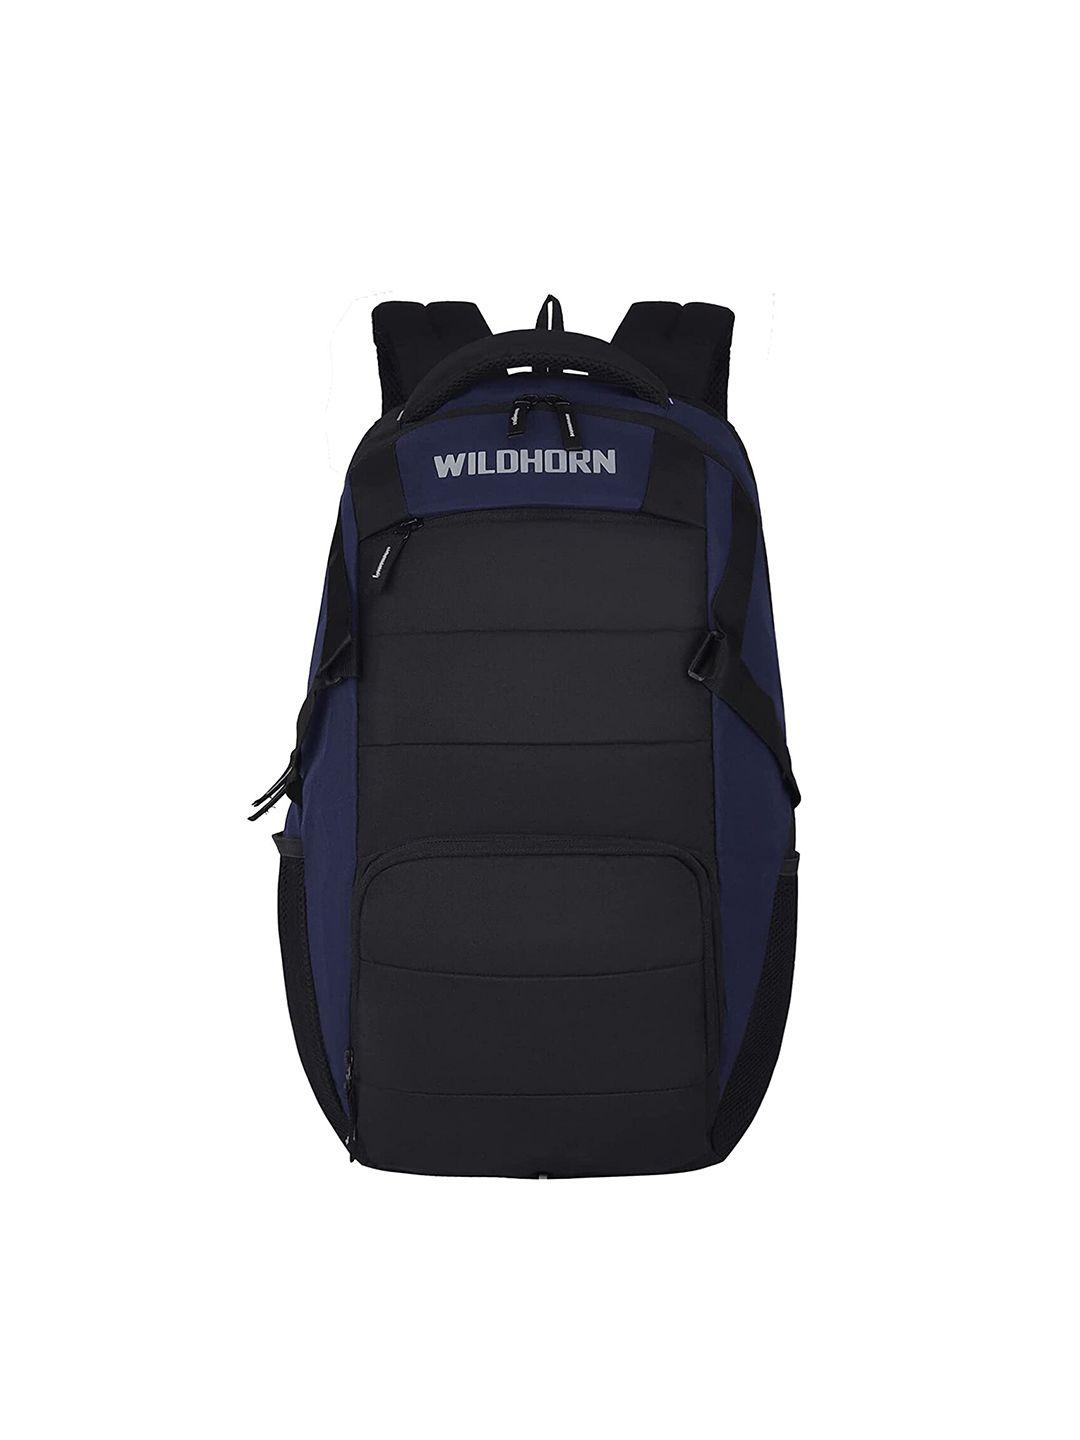 wildhorn typography laptop backpack with compression straps